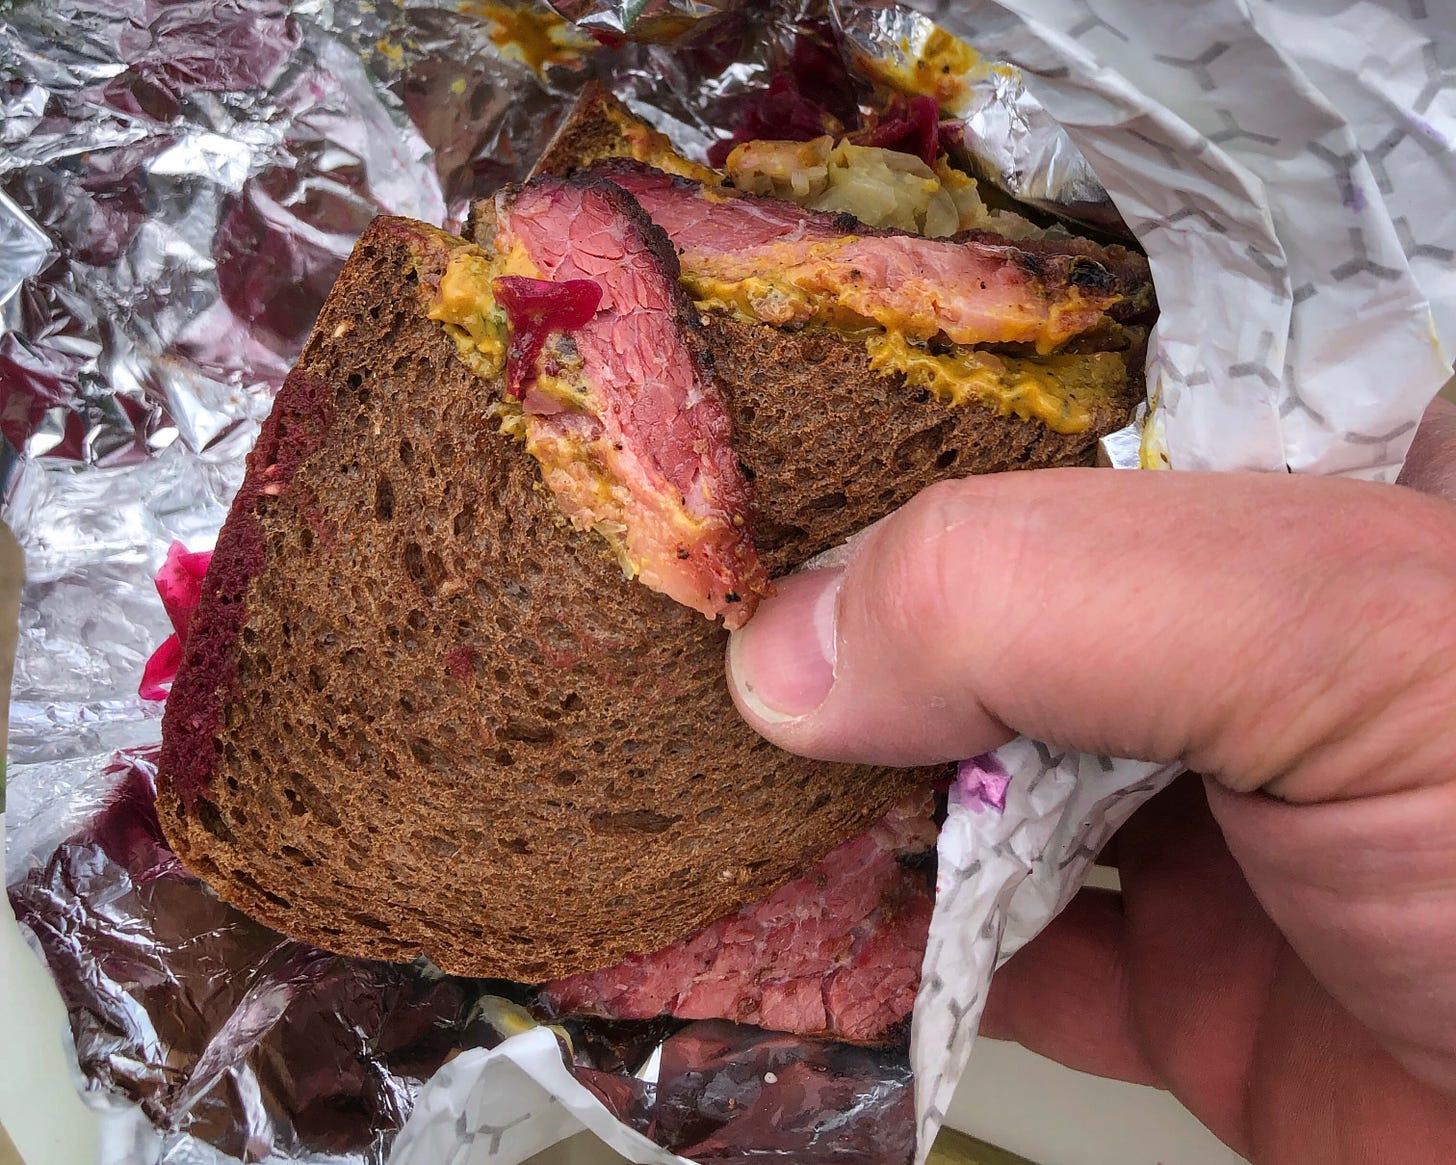 A hand holding a thick-cut pastrami sandwich on pumpernickel. There are visible patches of yellow mustard and red cabbage sauerkraut.